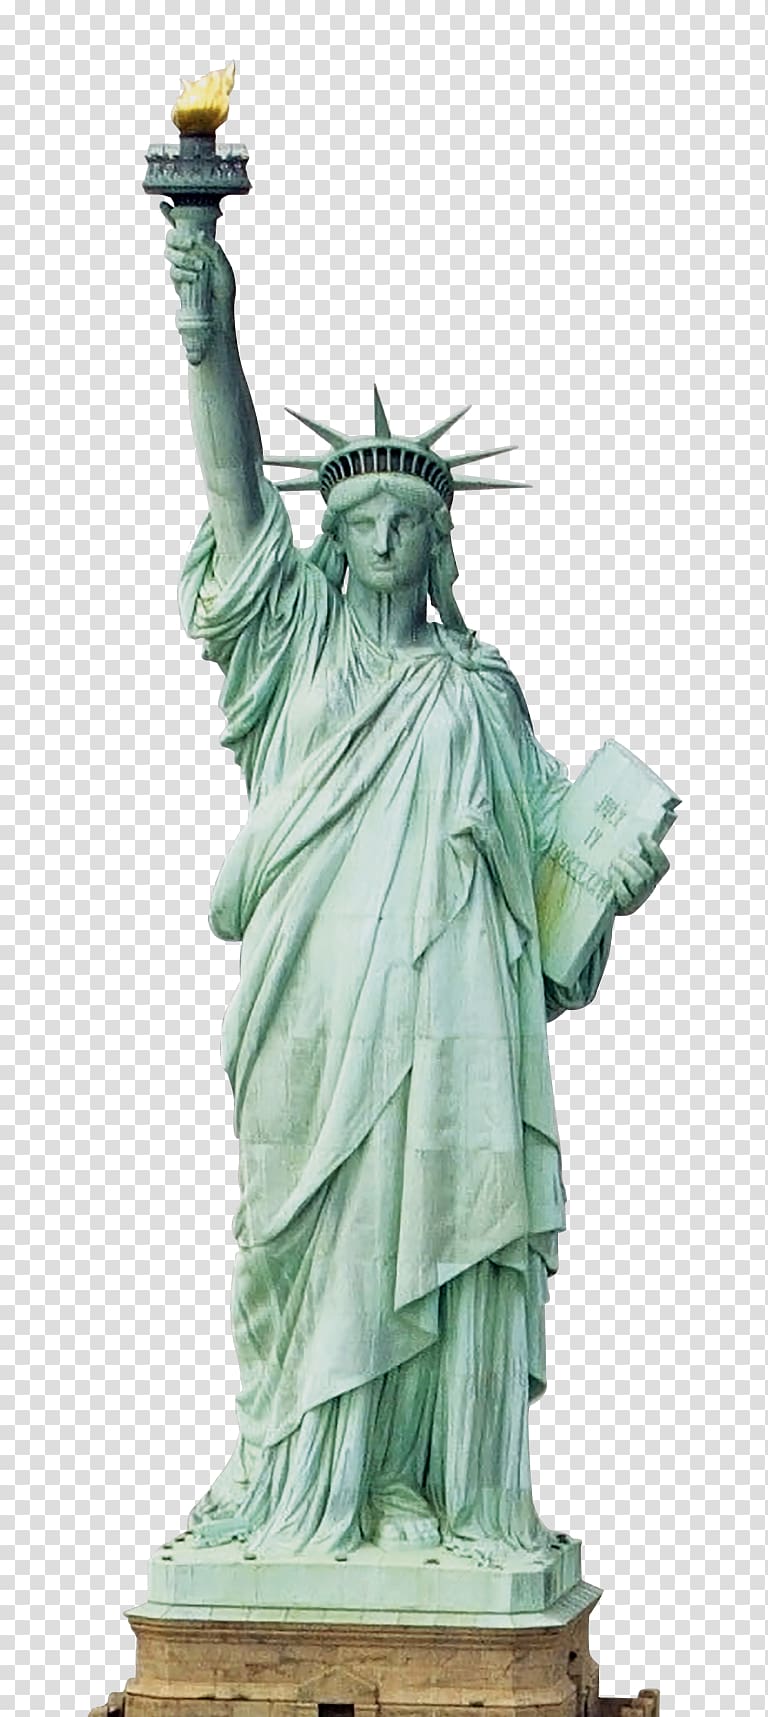 Statue of Liberty New York Harbor Staten Island Ferry Sculpture, statue transparent background PNG clipart